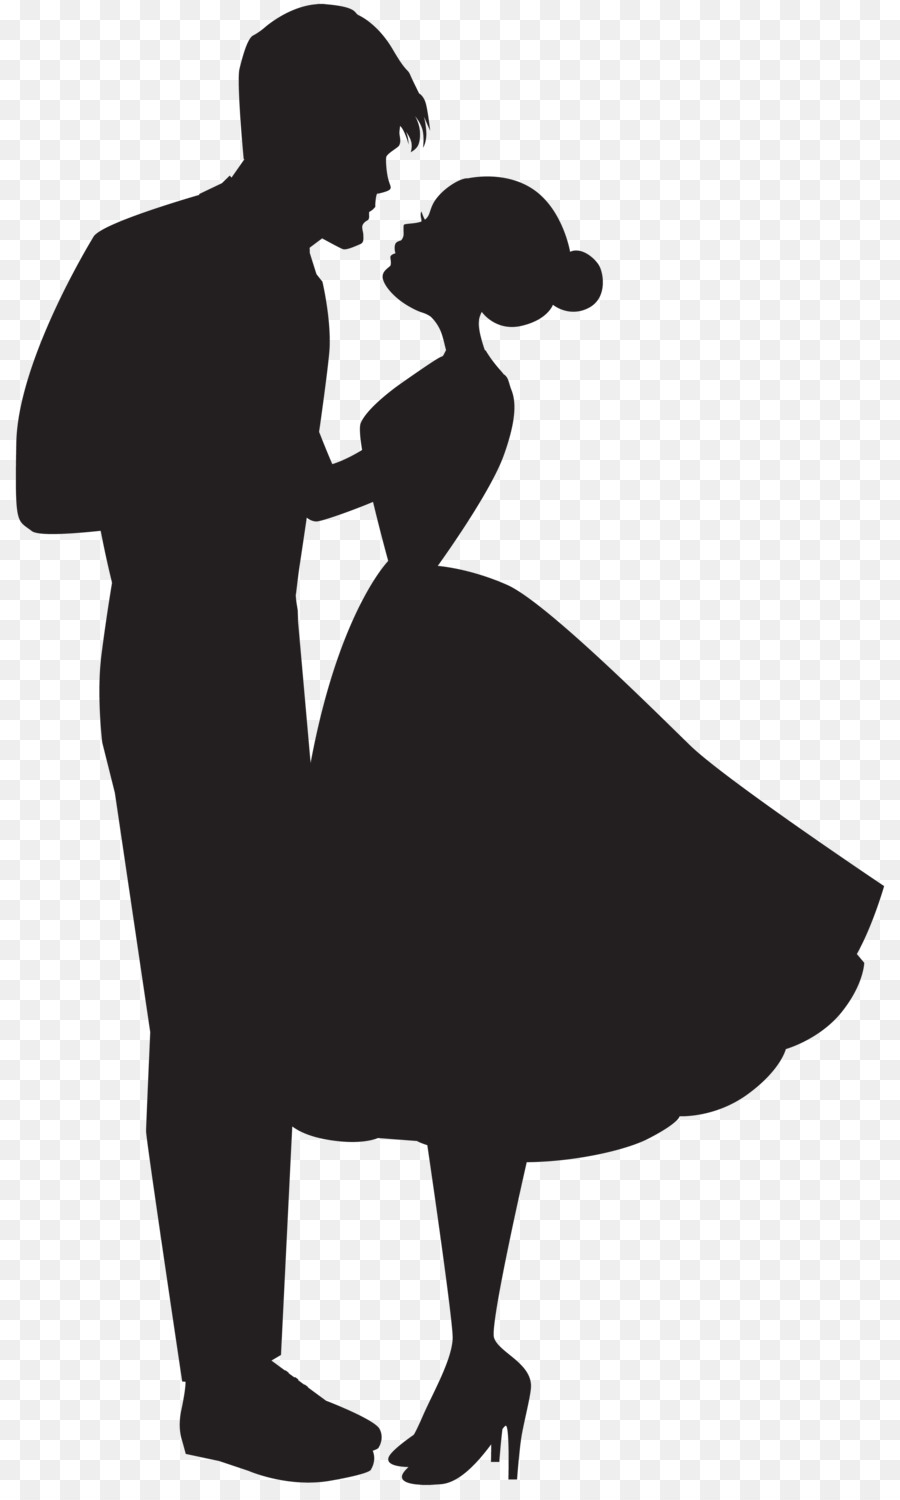 Love couple Silhouette Clip art - couple png download - 4814*8000 - Free Transparent Love png Download.